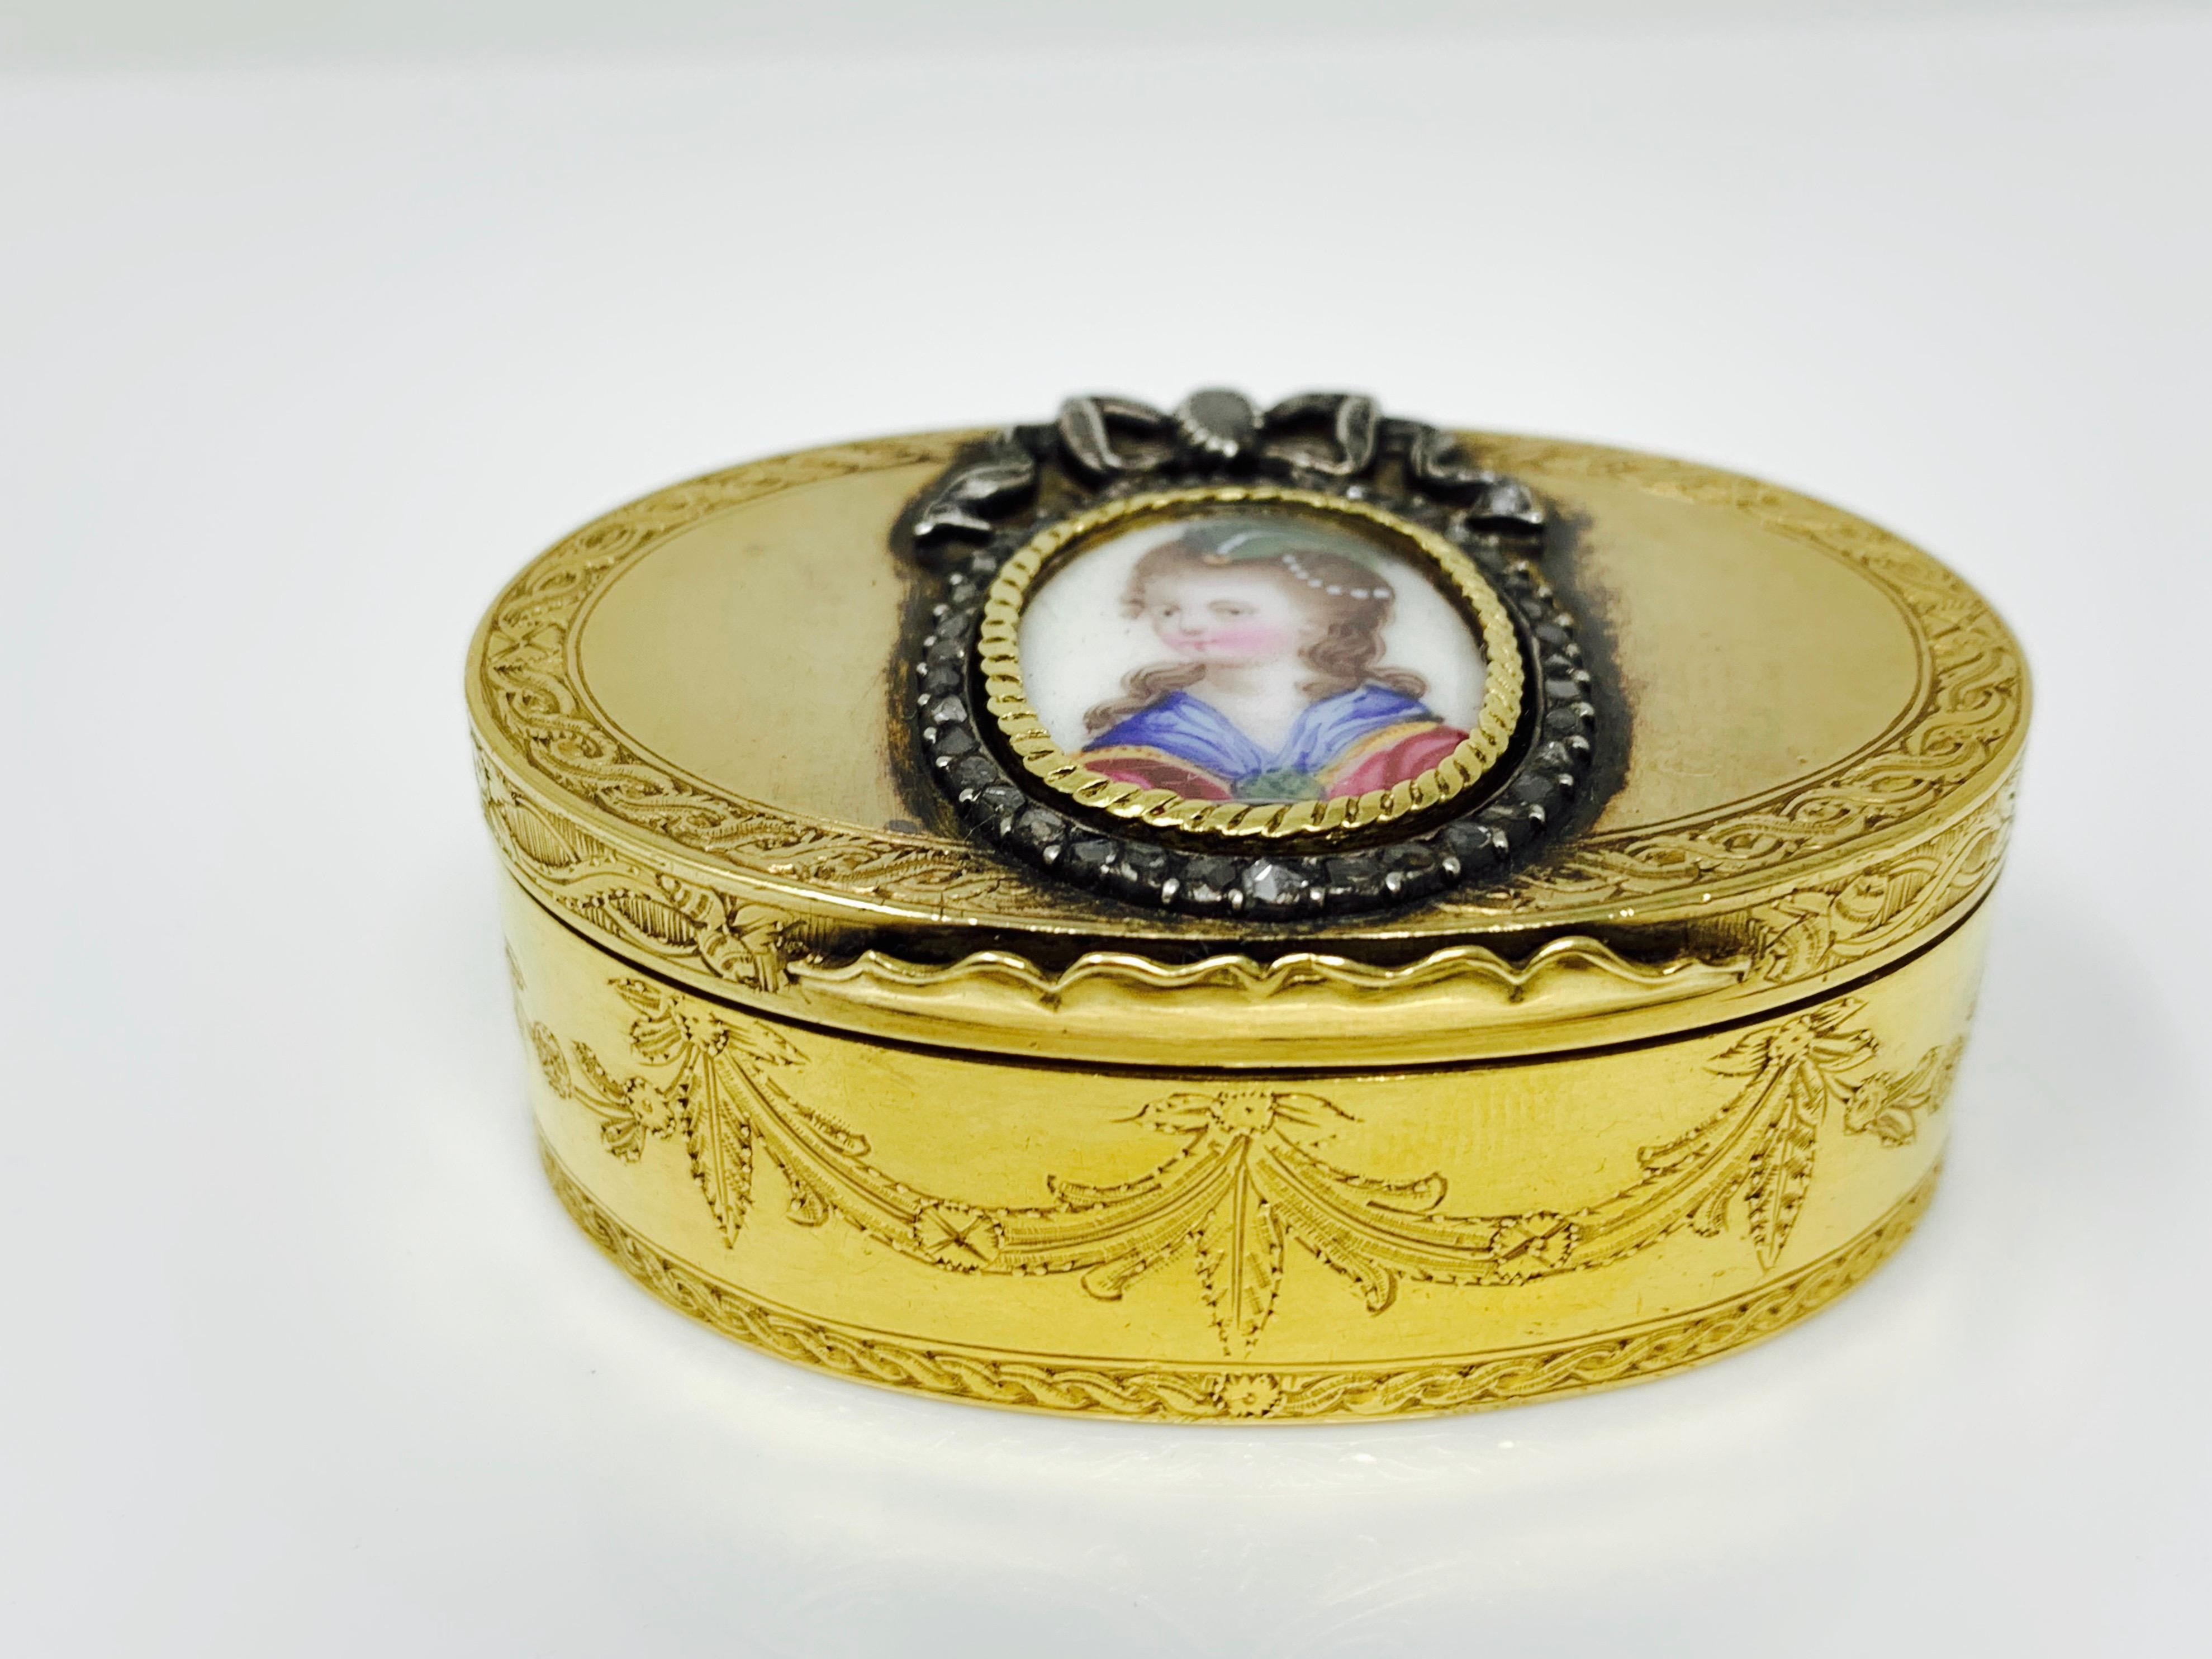 This beautiful jewelry box is handmade in 14 karat yellow gold with a beautiful picture set in rose cut diamond halo. 
Measurement : length: 2 1/4 inch 
                          width : 1 1/2 inch
                          depth : 1 inch 